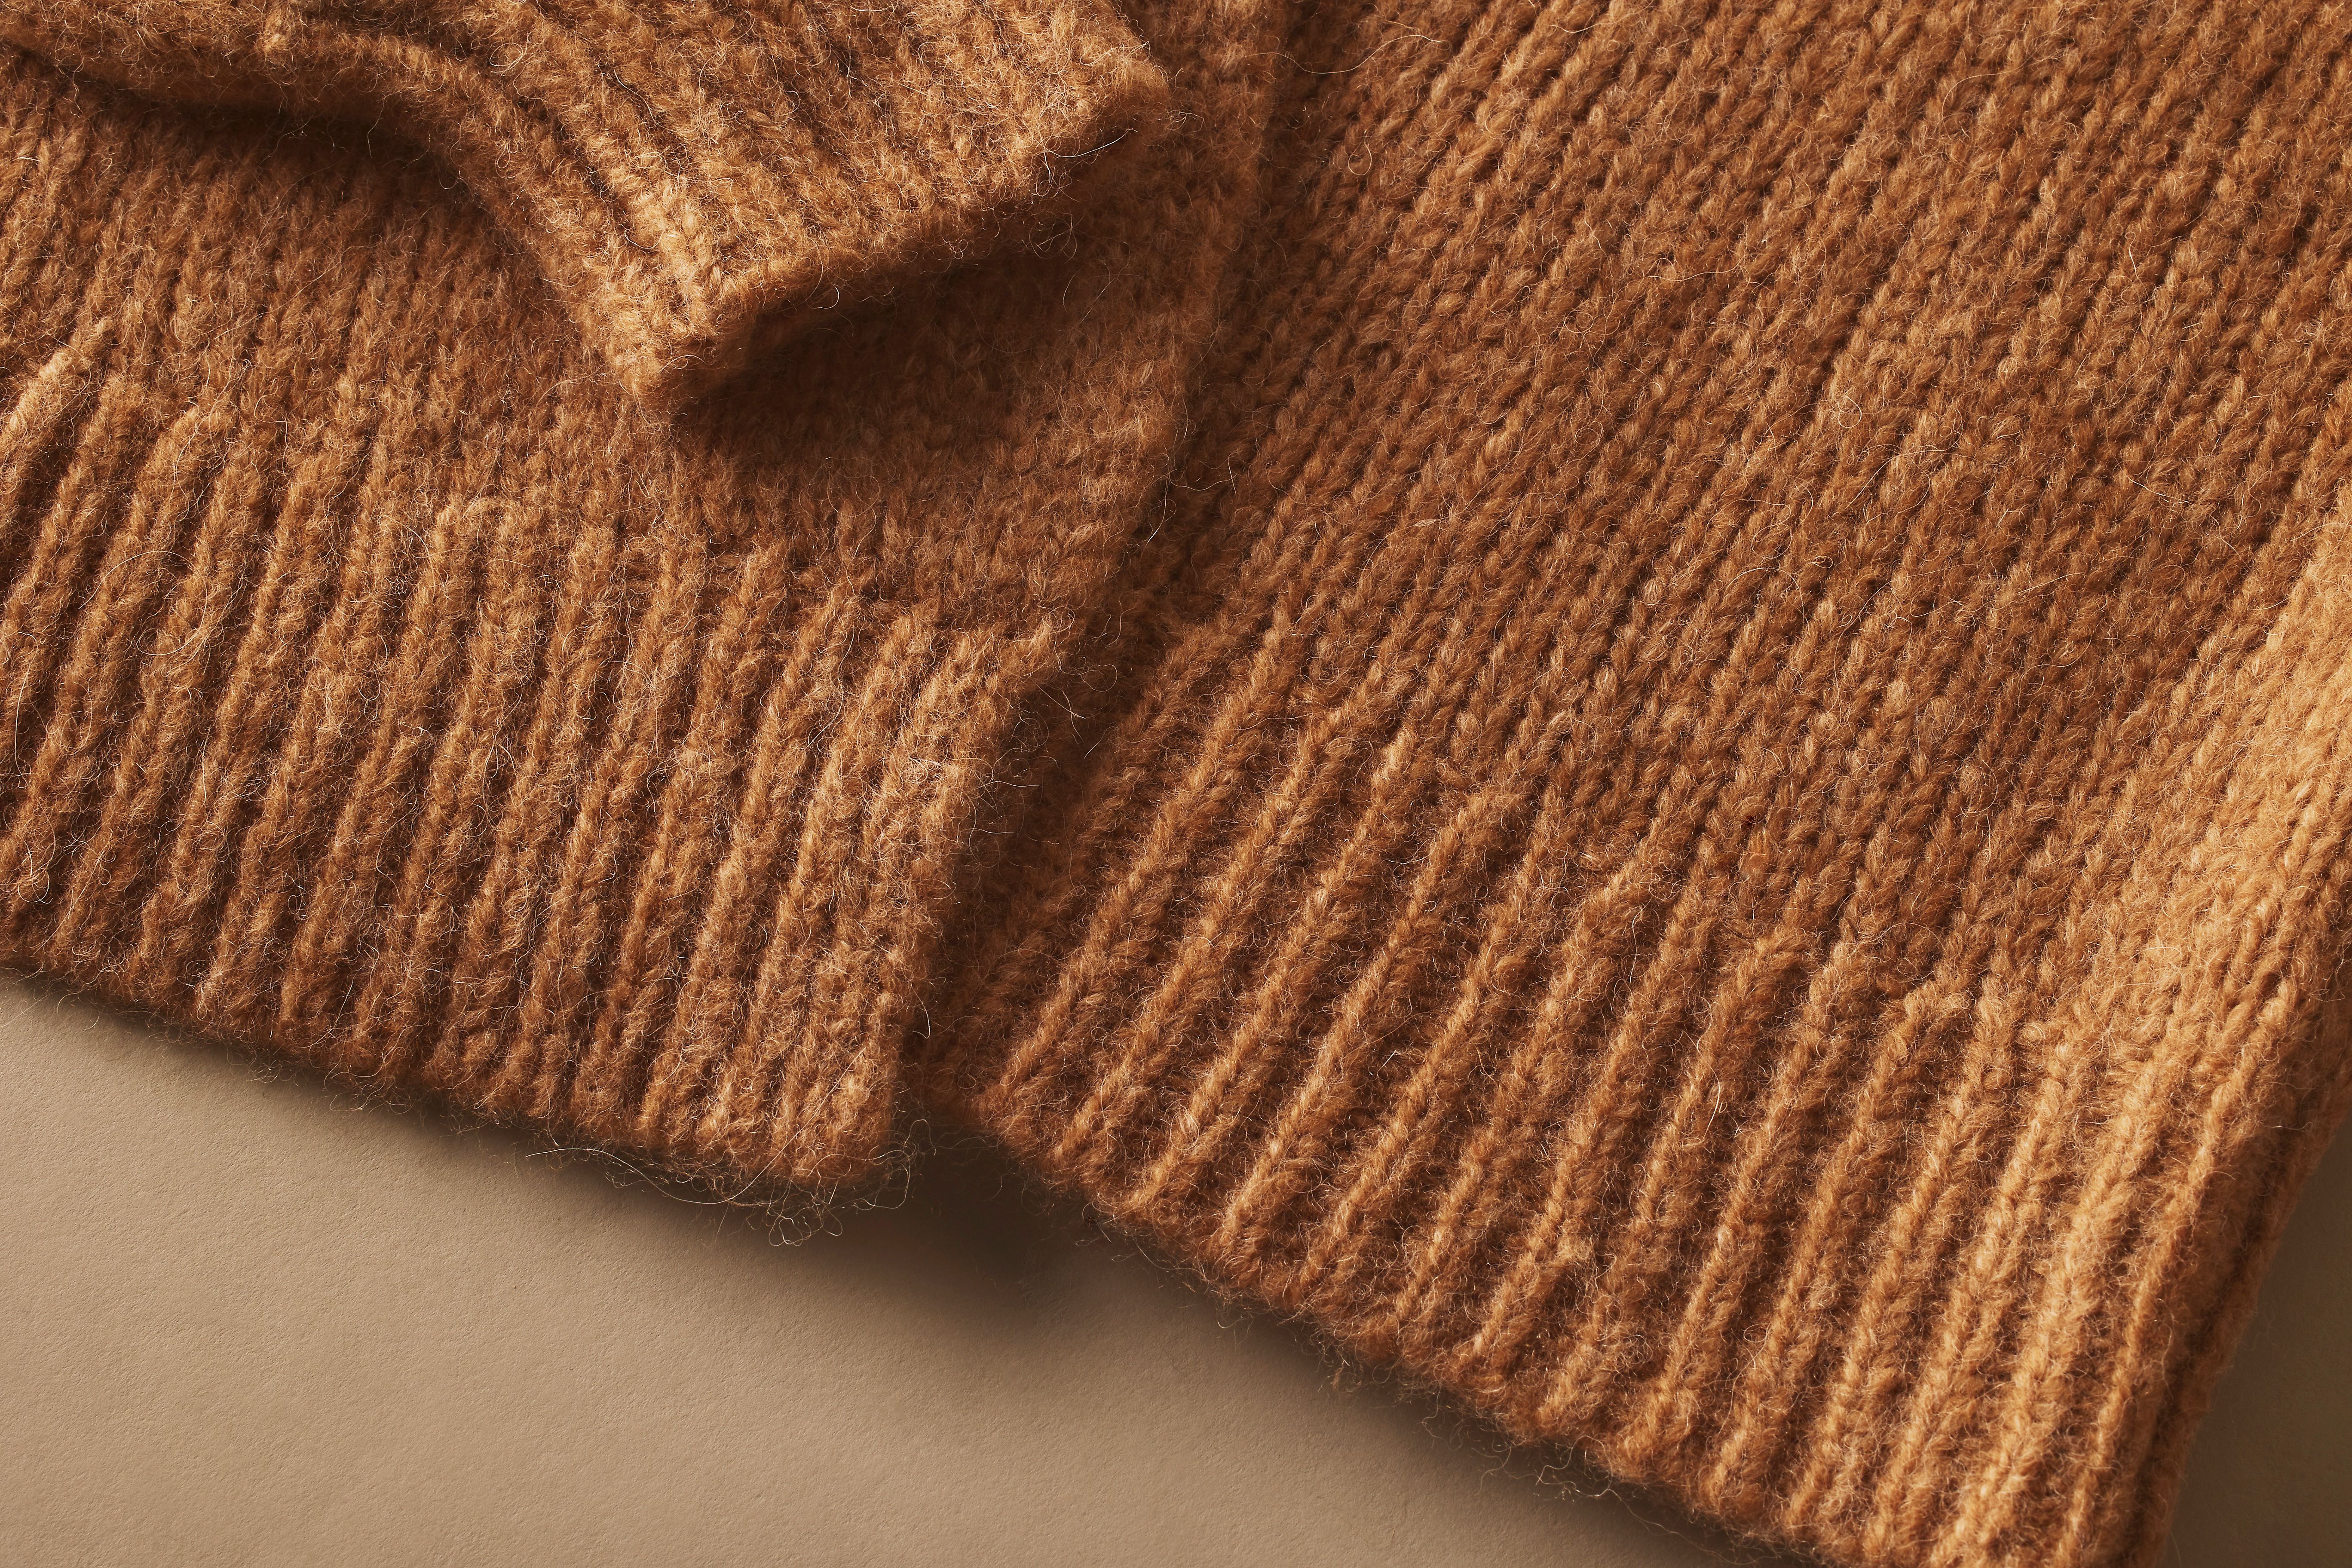 Scanlan Theodore alpaca sweater with close up of texture and cuff detail.